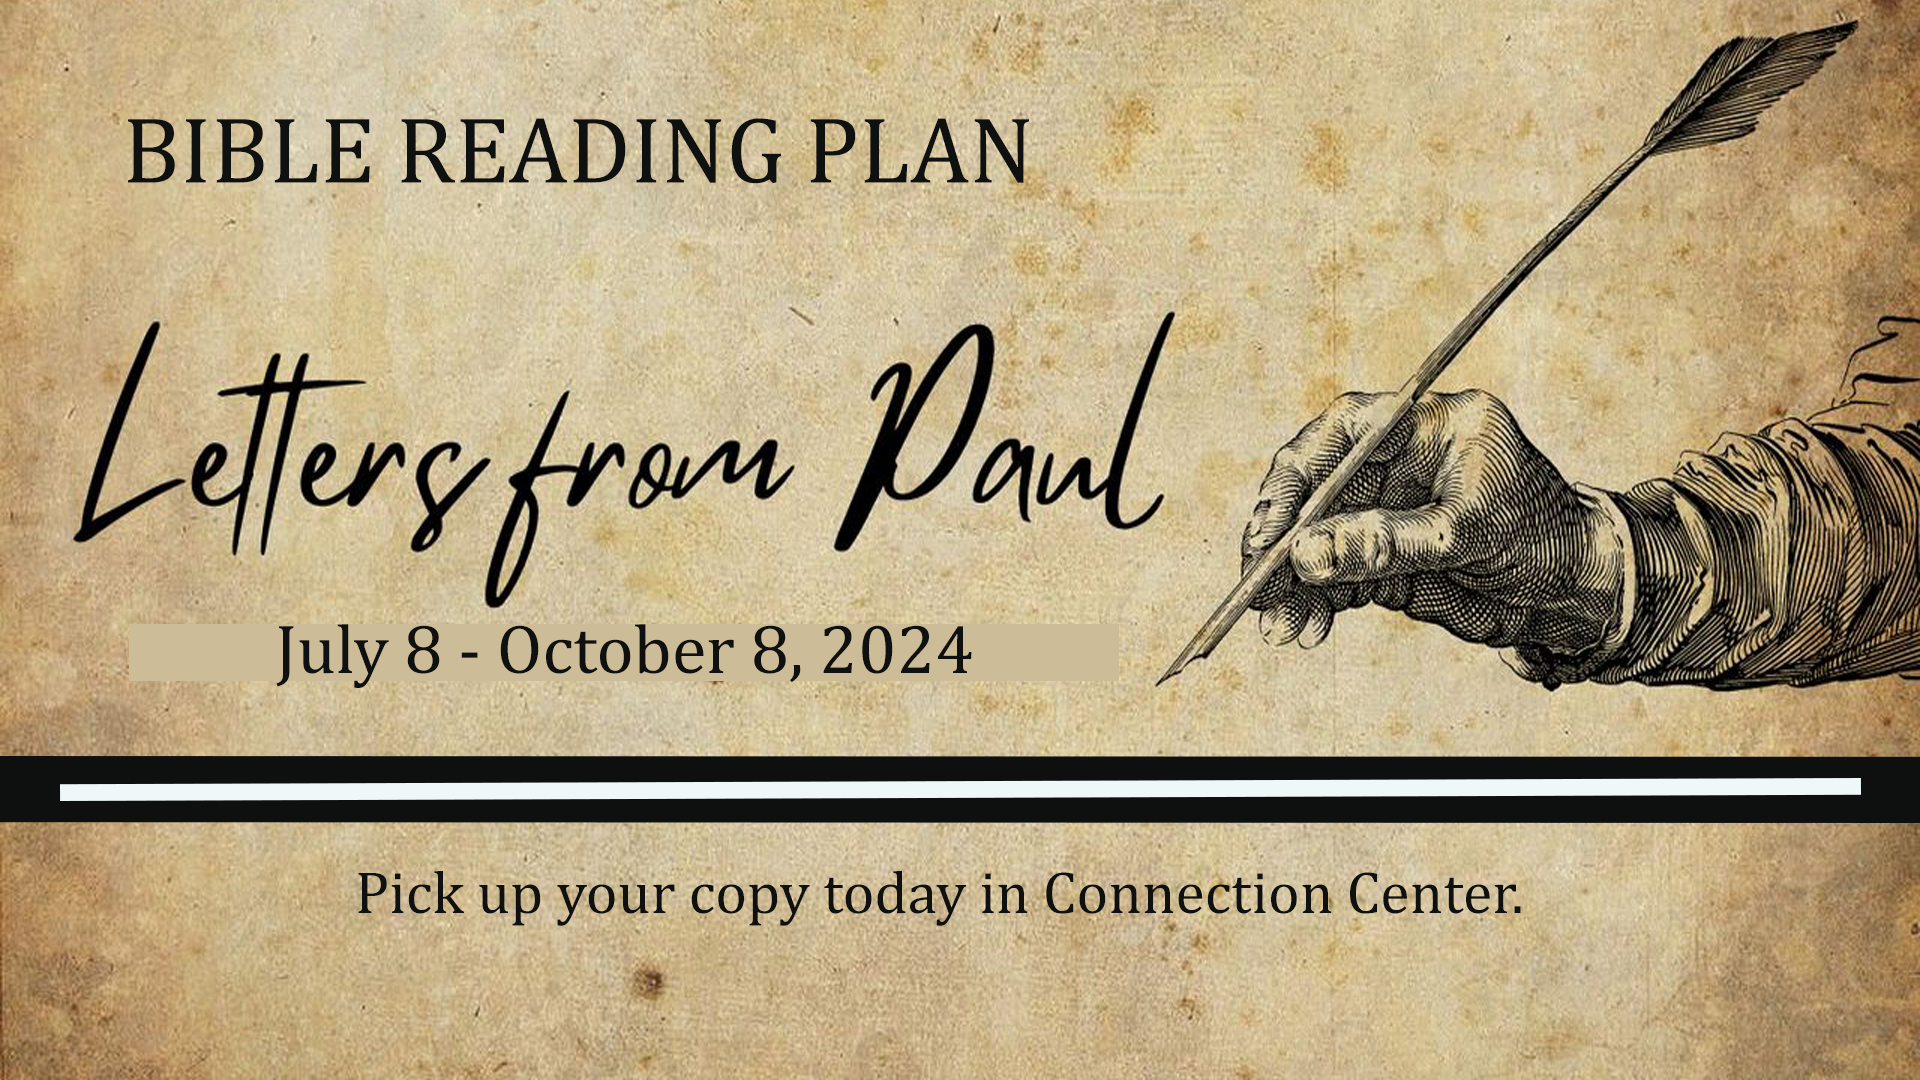 Letters from Paul - Bible Reading Plan